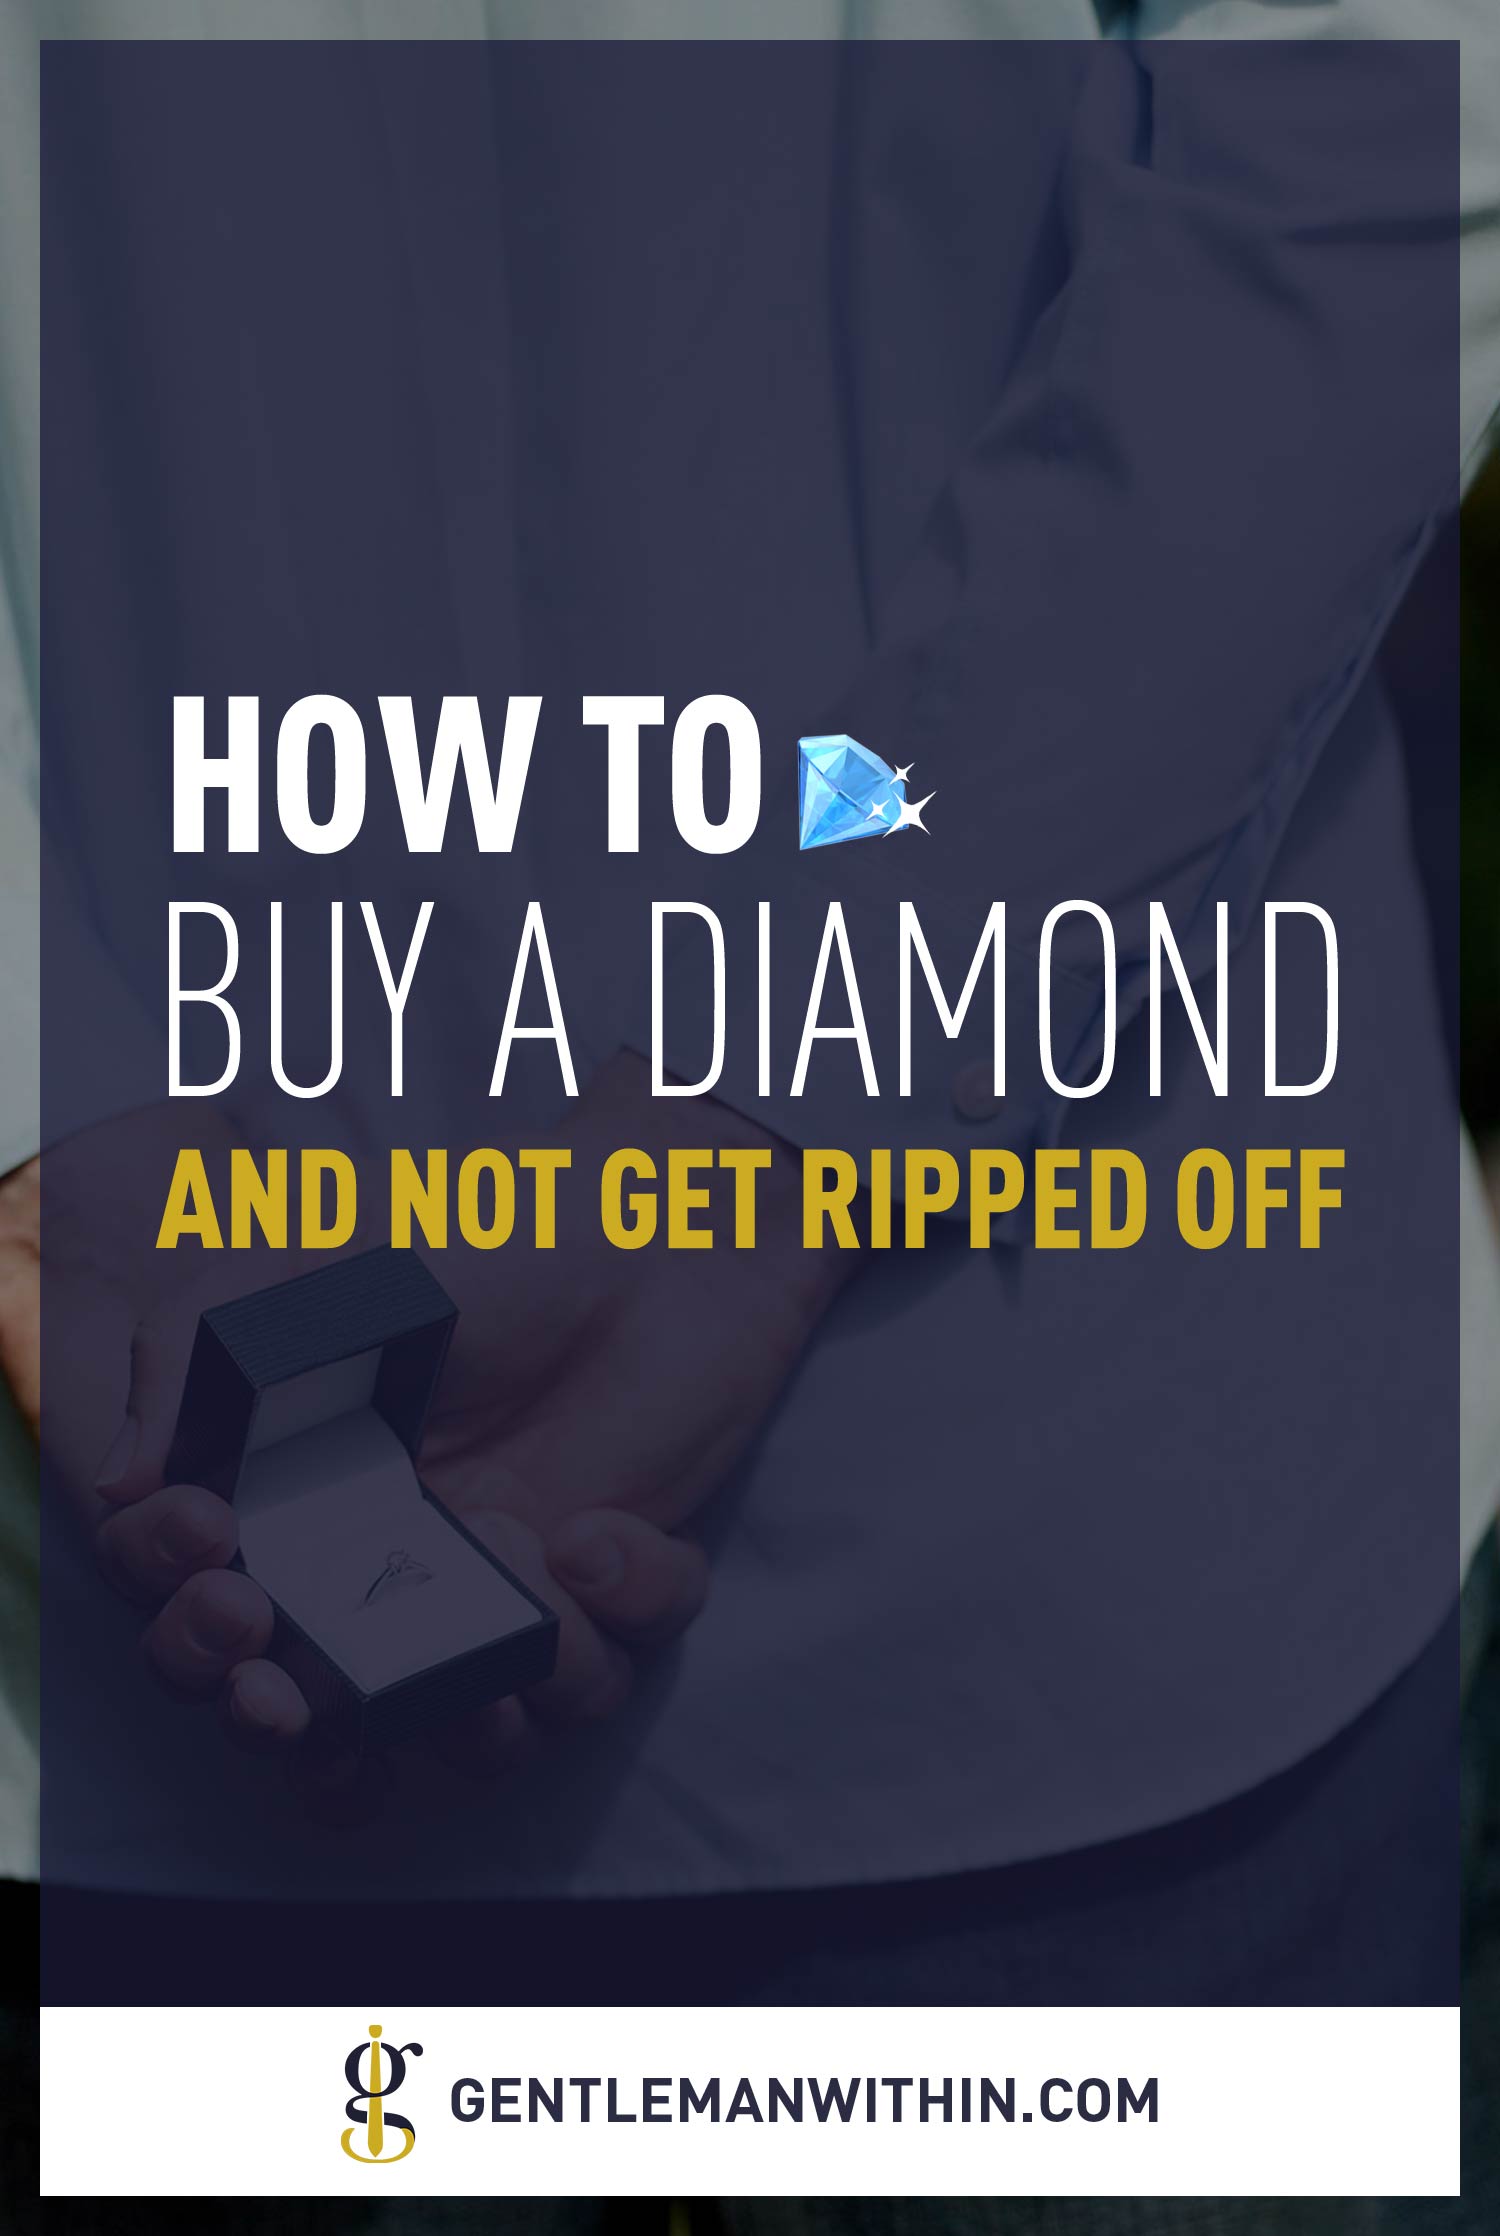 How To Buy A Diamond Without Getting Ripped Off | GENTLEMAN WITHIN